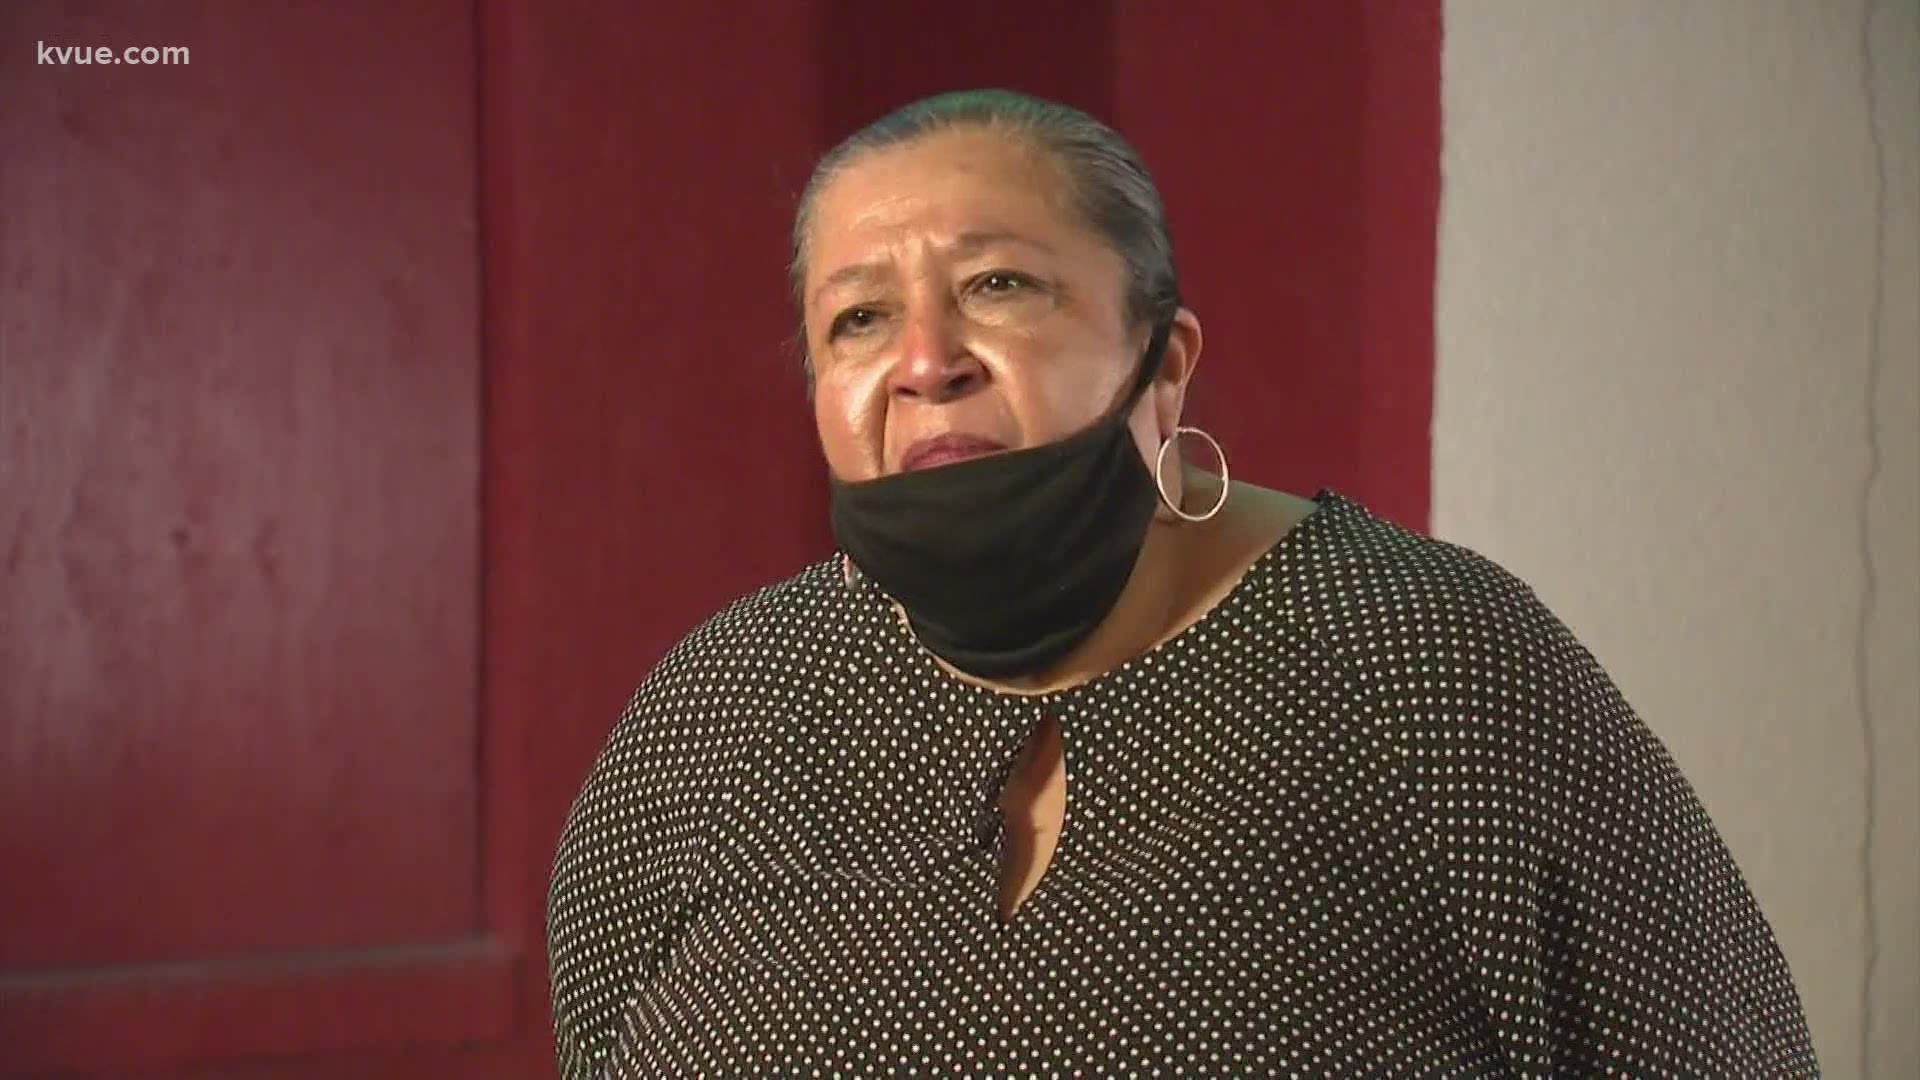 Brenda Ramos, the mother of Michael Ramos, speaks out after officer Christopher Taylor's murder indictment. She told KVUE the news felt like justice.